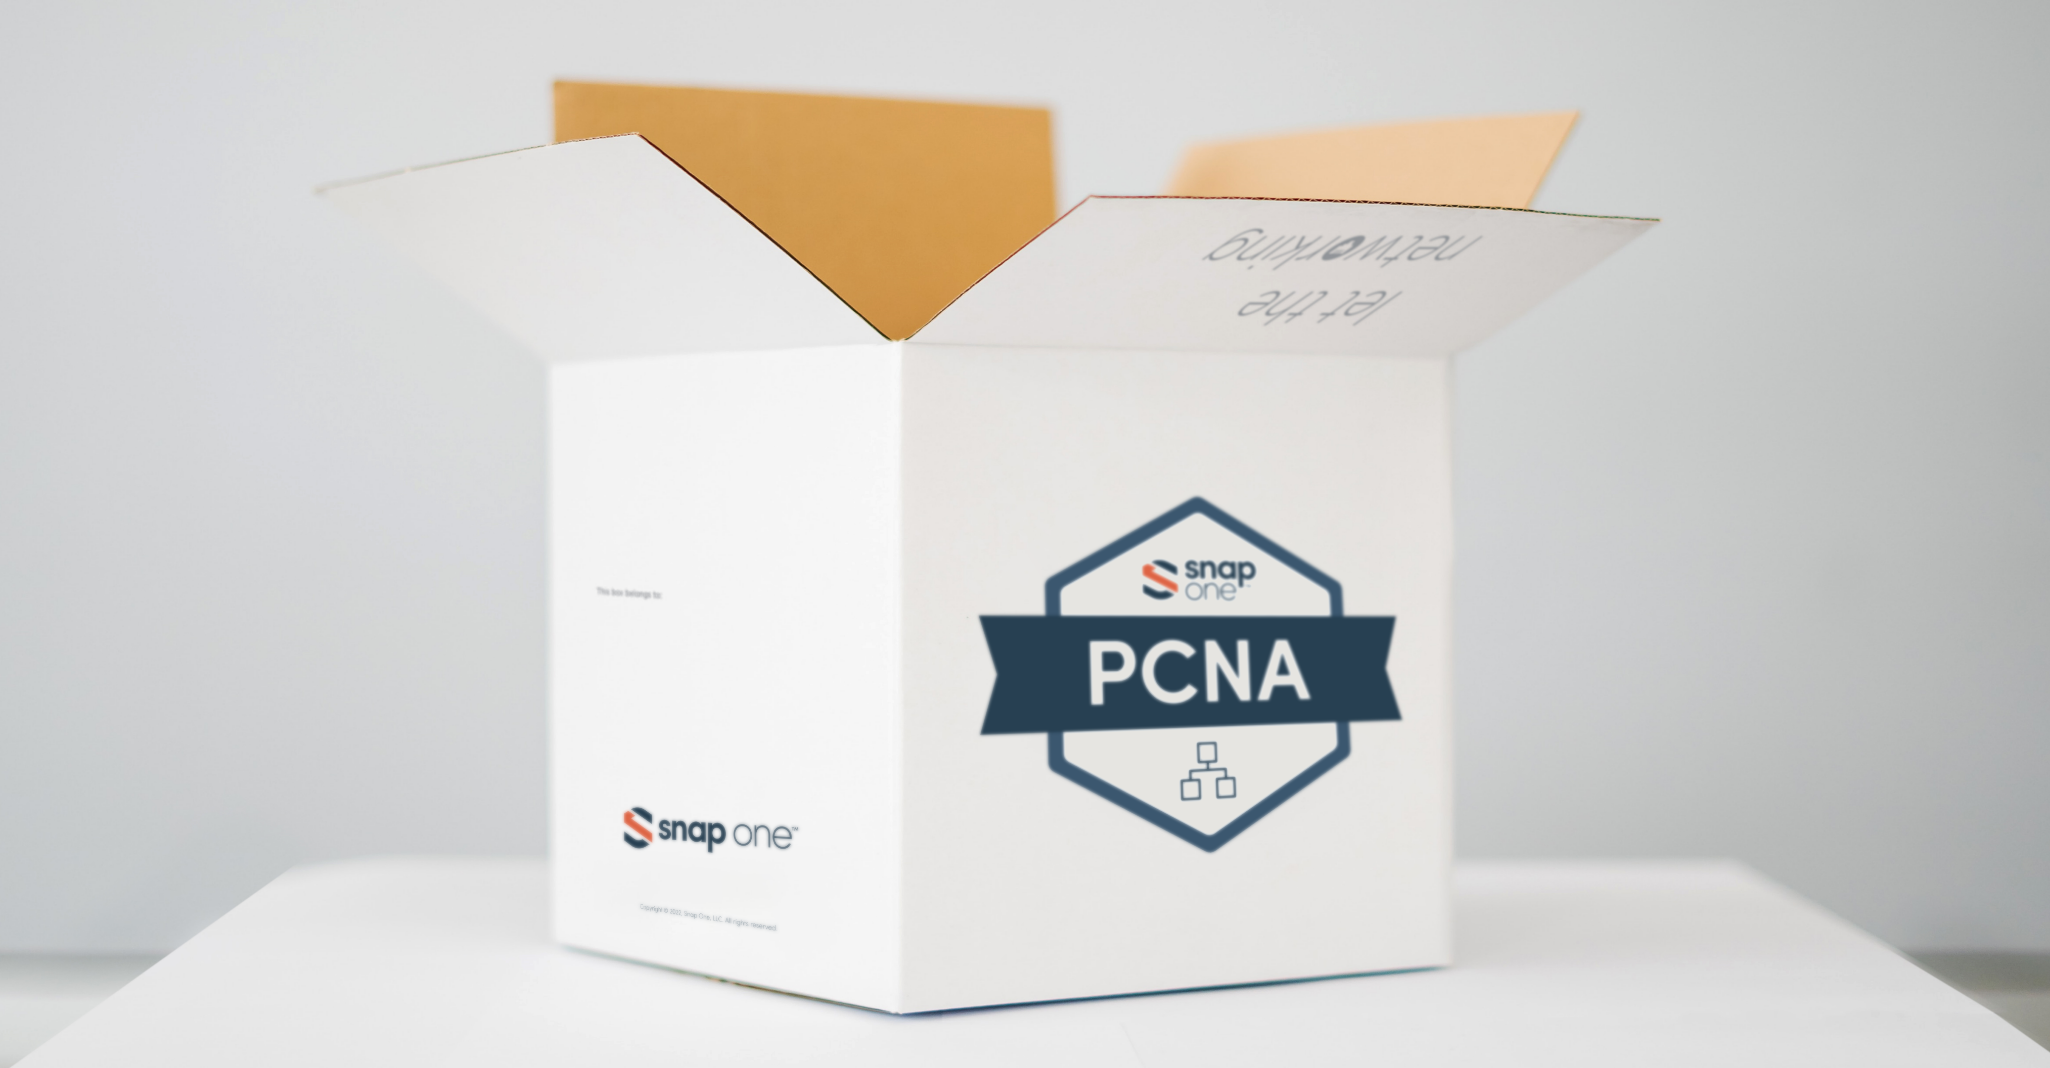 Open box with PCNA logo on outside